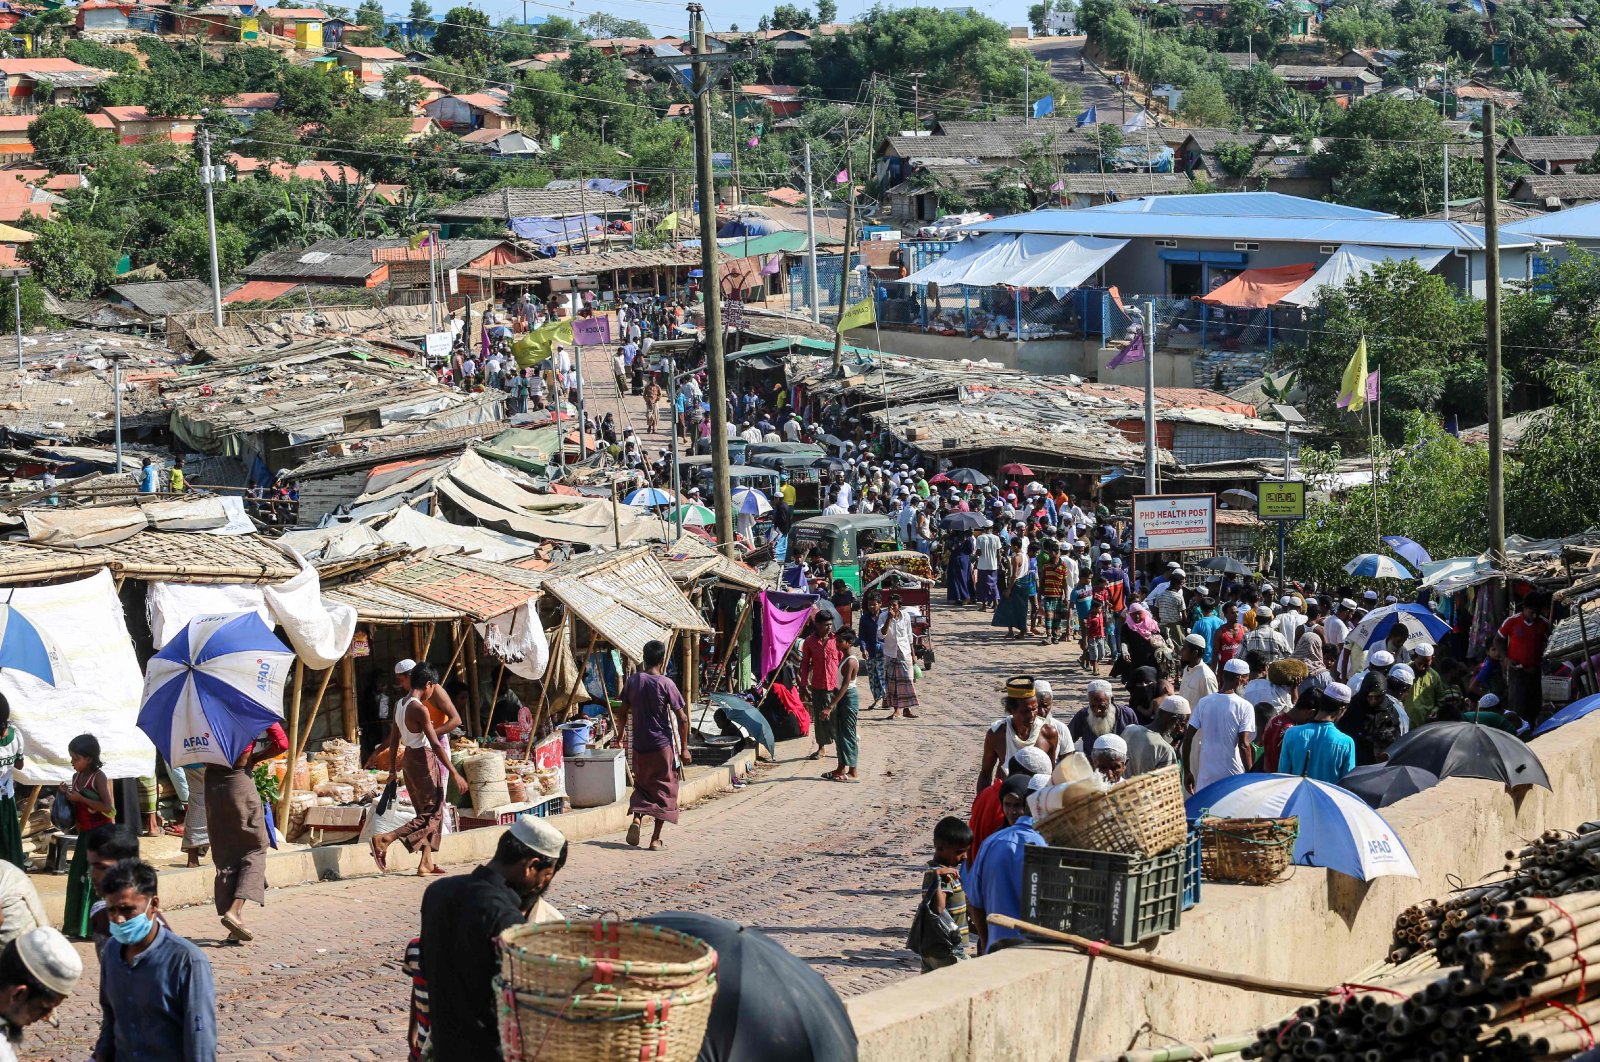 Rohingya refugees gather at a market as the first cases of COVID-19 emerged in the area, in the Kutupalong refugee camp in Ukhia, May 15, 2020. (AFP Photo)